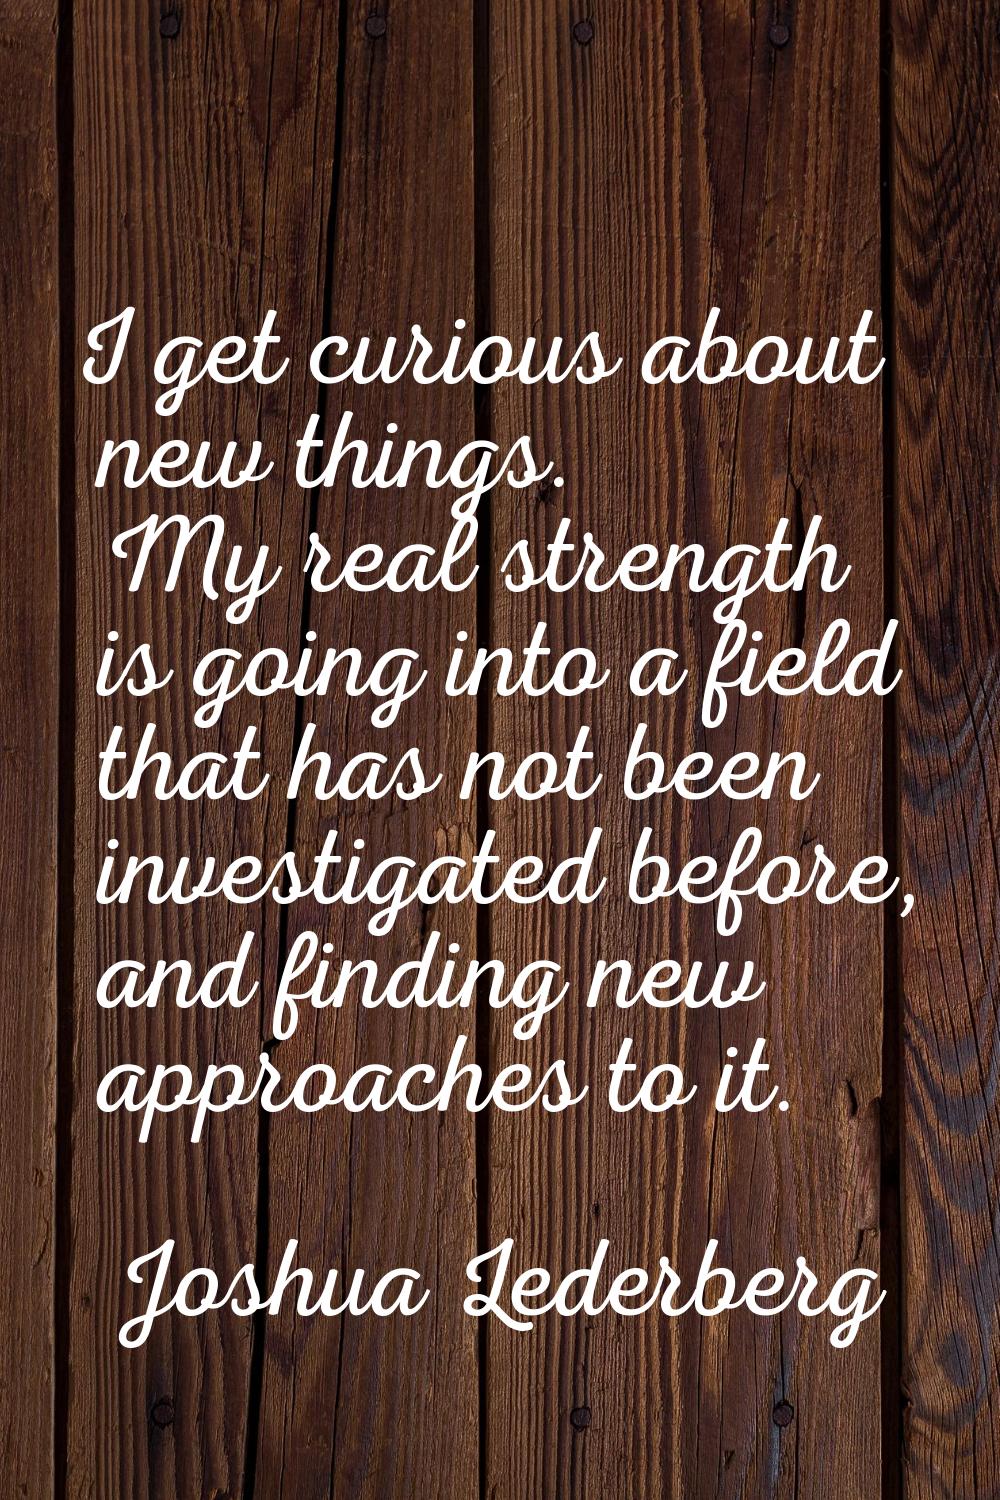 I get curious about new things. My real strength is going into a field that has not been investigat